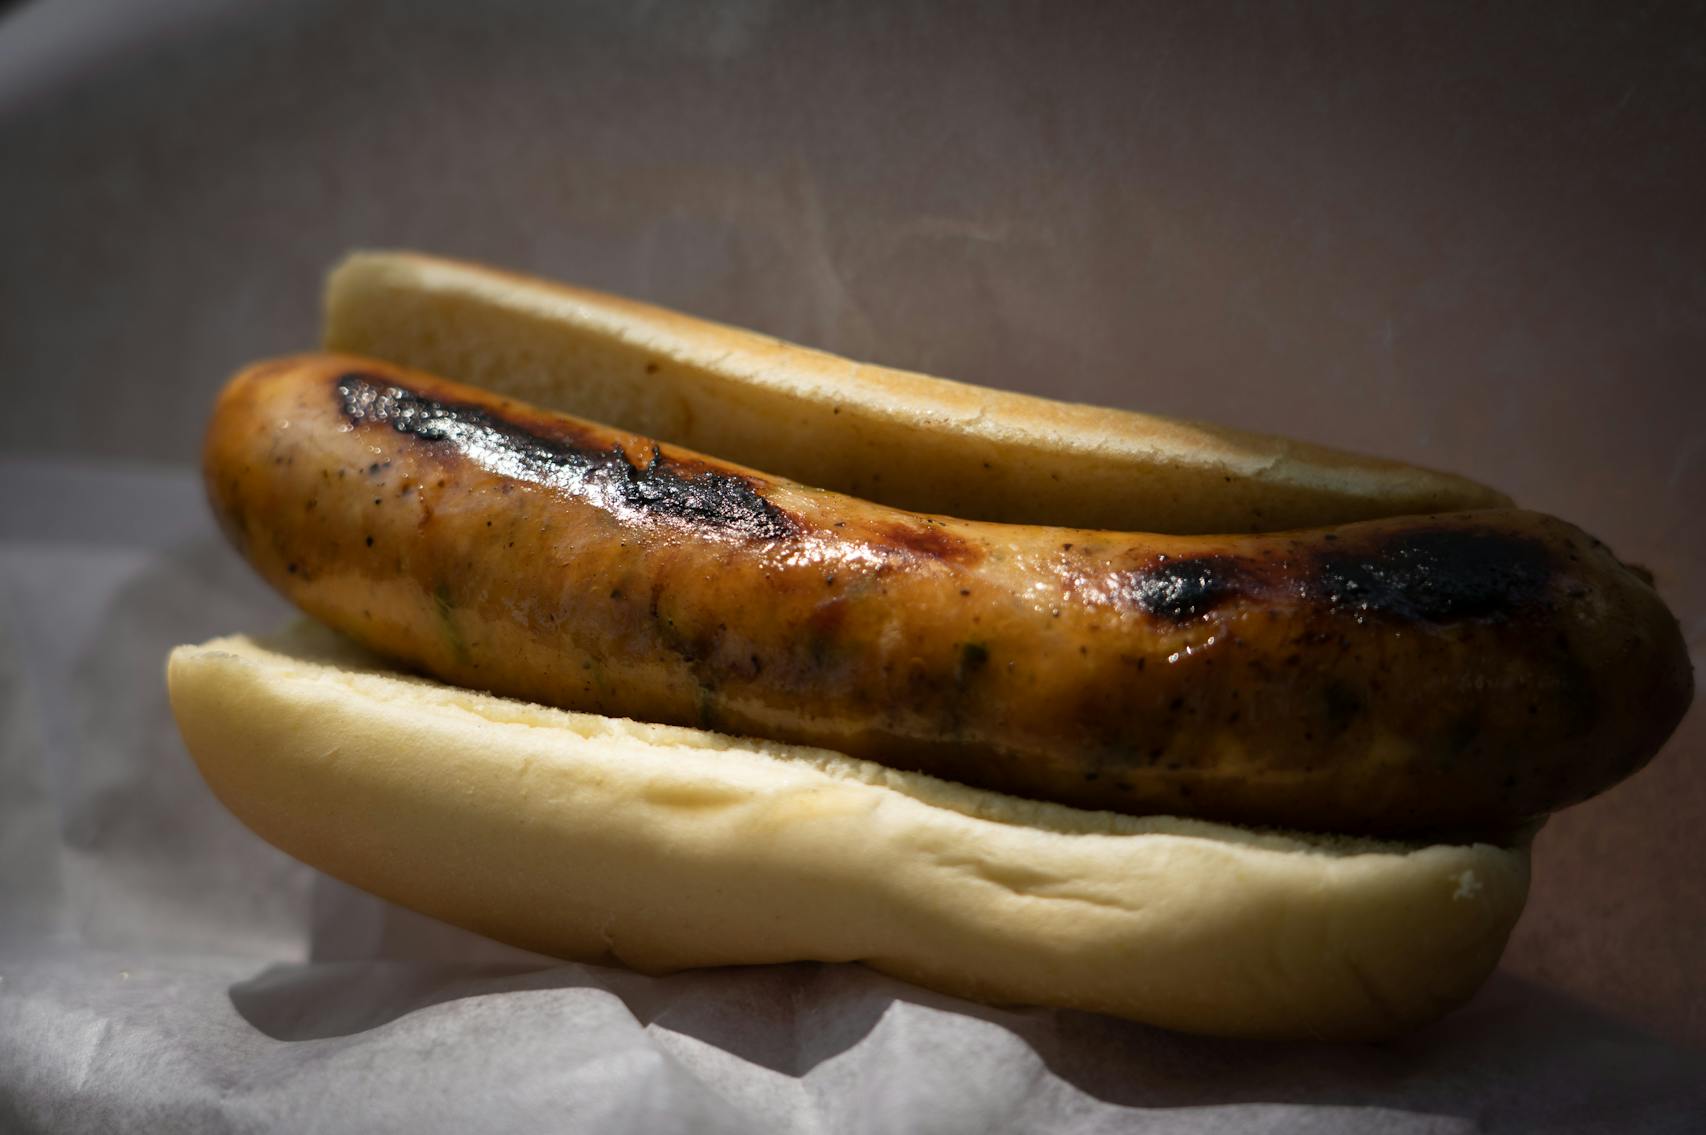 Chick N Swiss Sausage from Gass Station Grill. New foods at the Minnesota State Fair photographed on Thursday, Aug. 25, 2022 in Falcon Heights, Minn. ] RENEE JONES SCHNEIDER • renee.jones@startribune.com